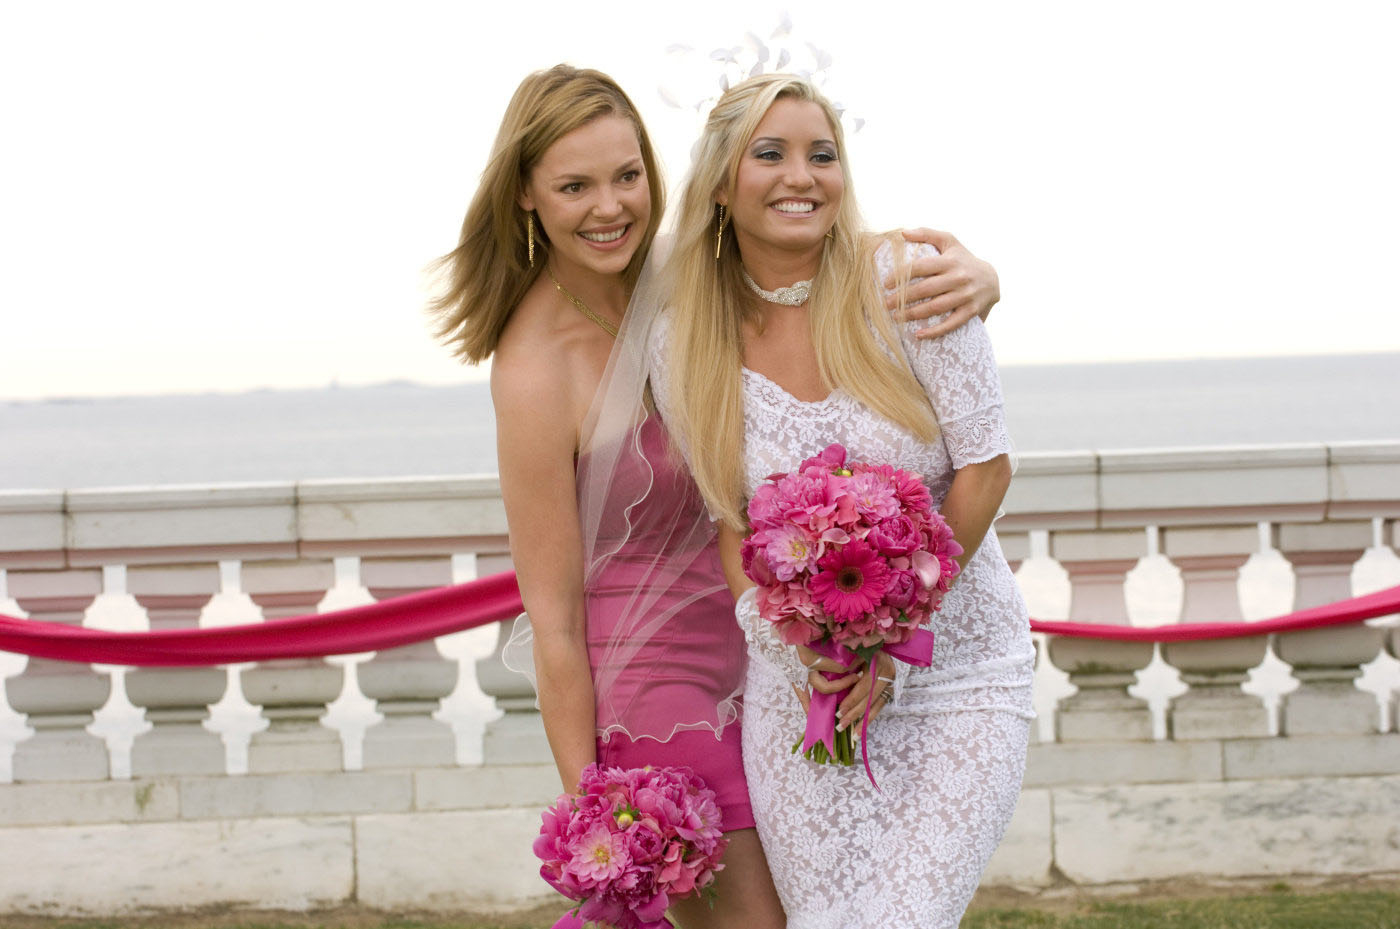 Katherine Heigel wearing a pink bridesmaids dress and holding a pink bouquet by a bride smiling